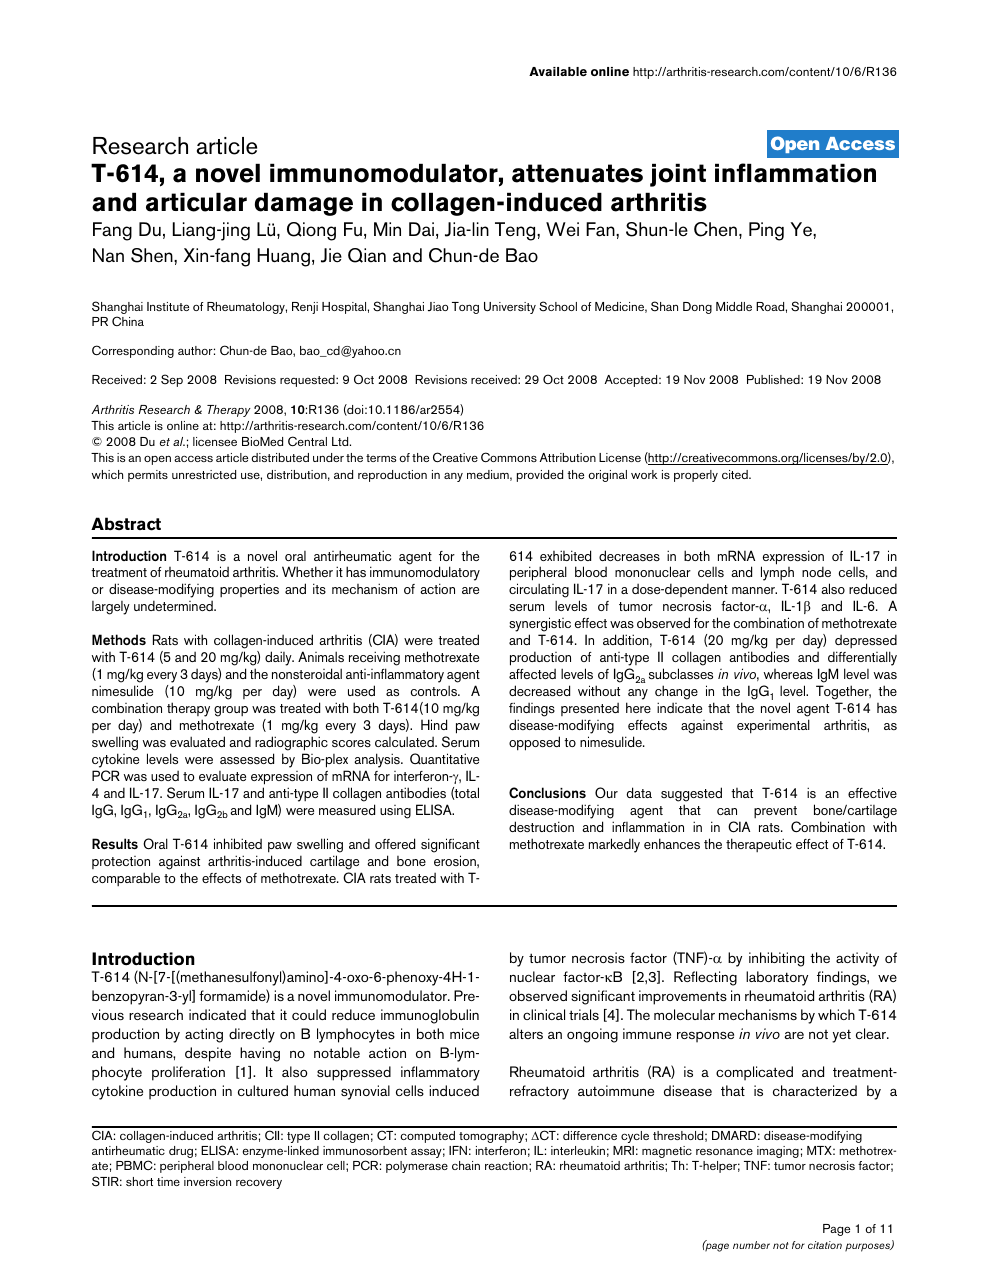 T 614 A Novel Immunomodulator Attenuates Joint Inflammation And Articular Damage In Collagen Induced Arthritis Topic Of Research Paper In Clinical Medicine Download Scholarly Article Pdf And Read For Free On Cyberleninka Open